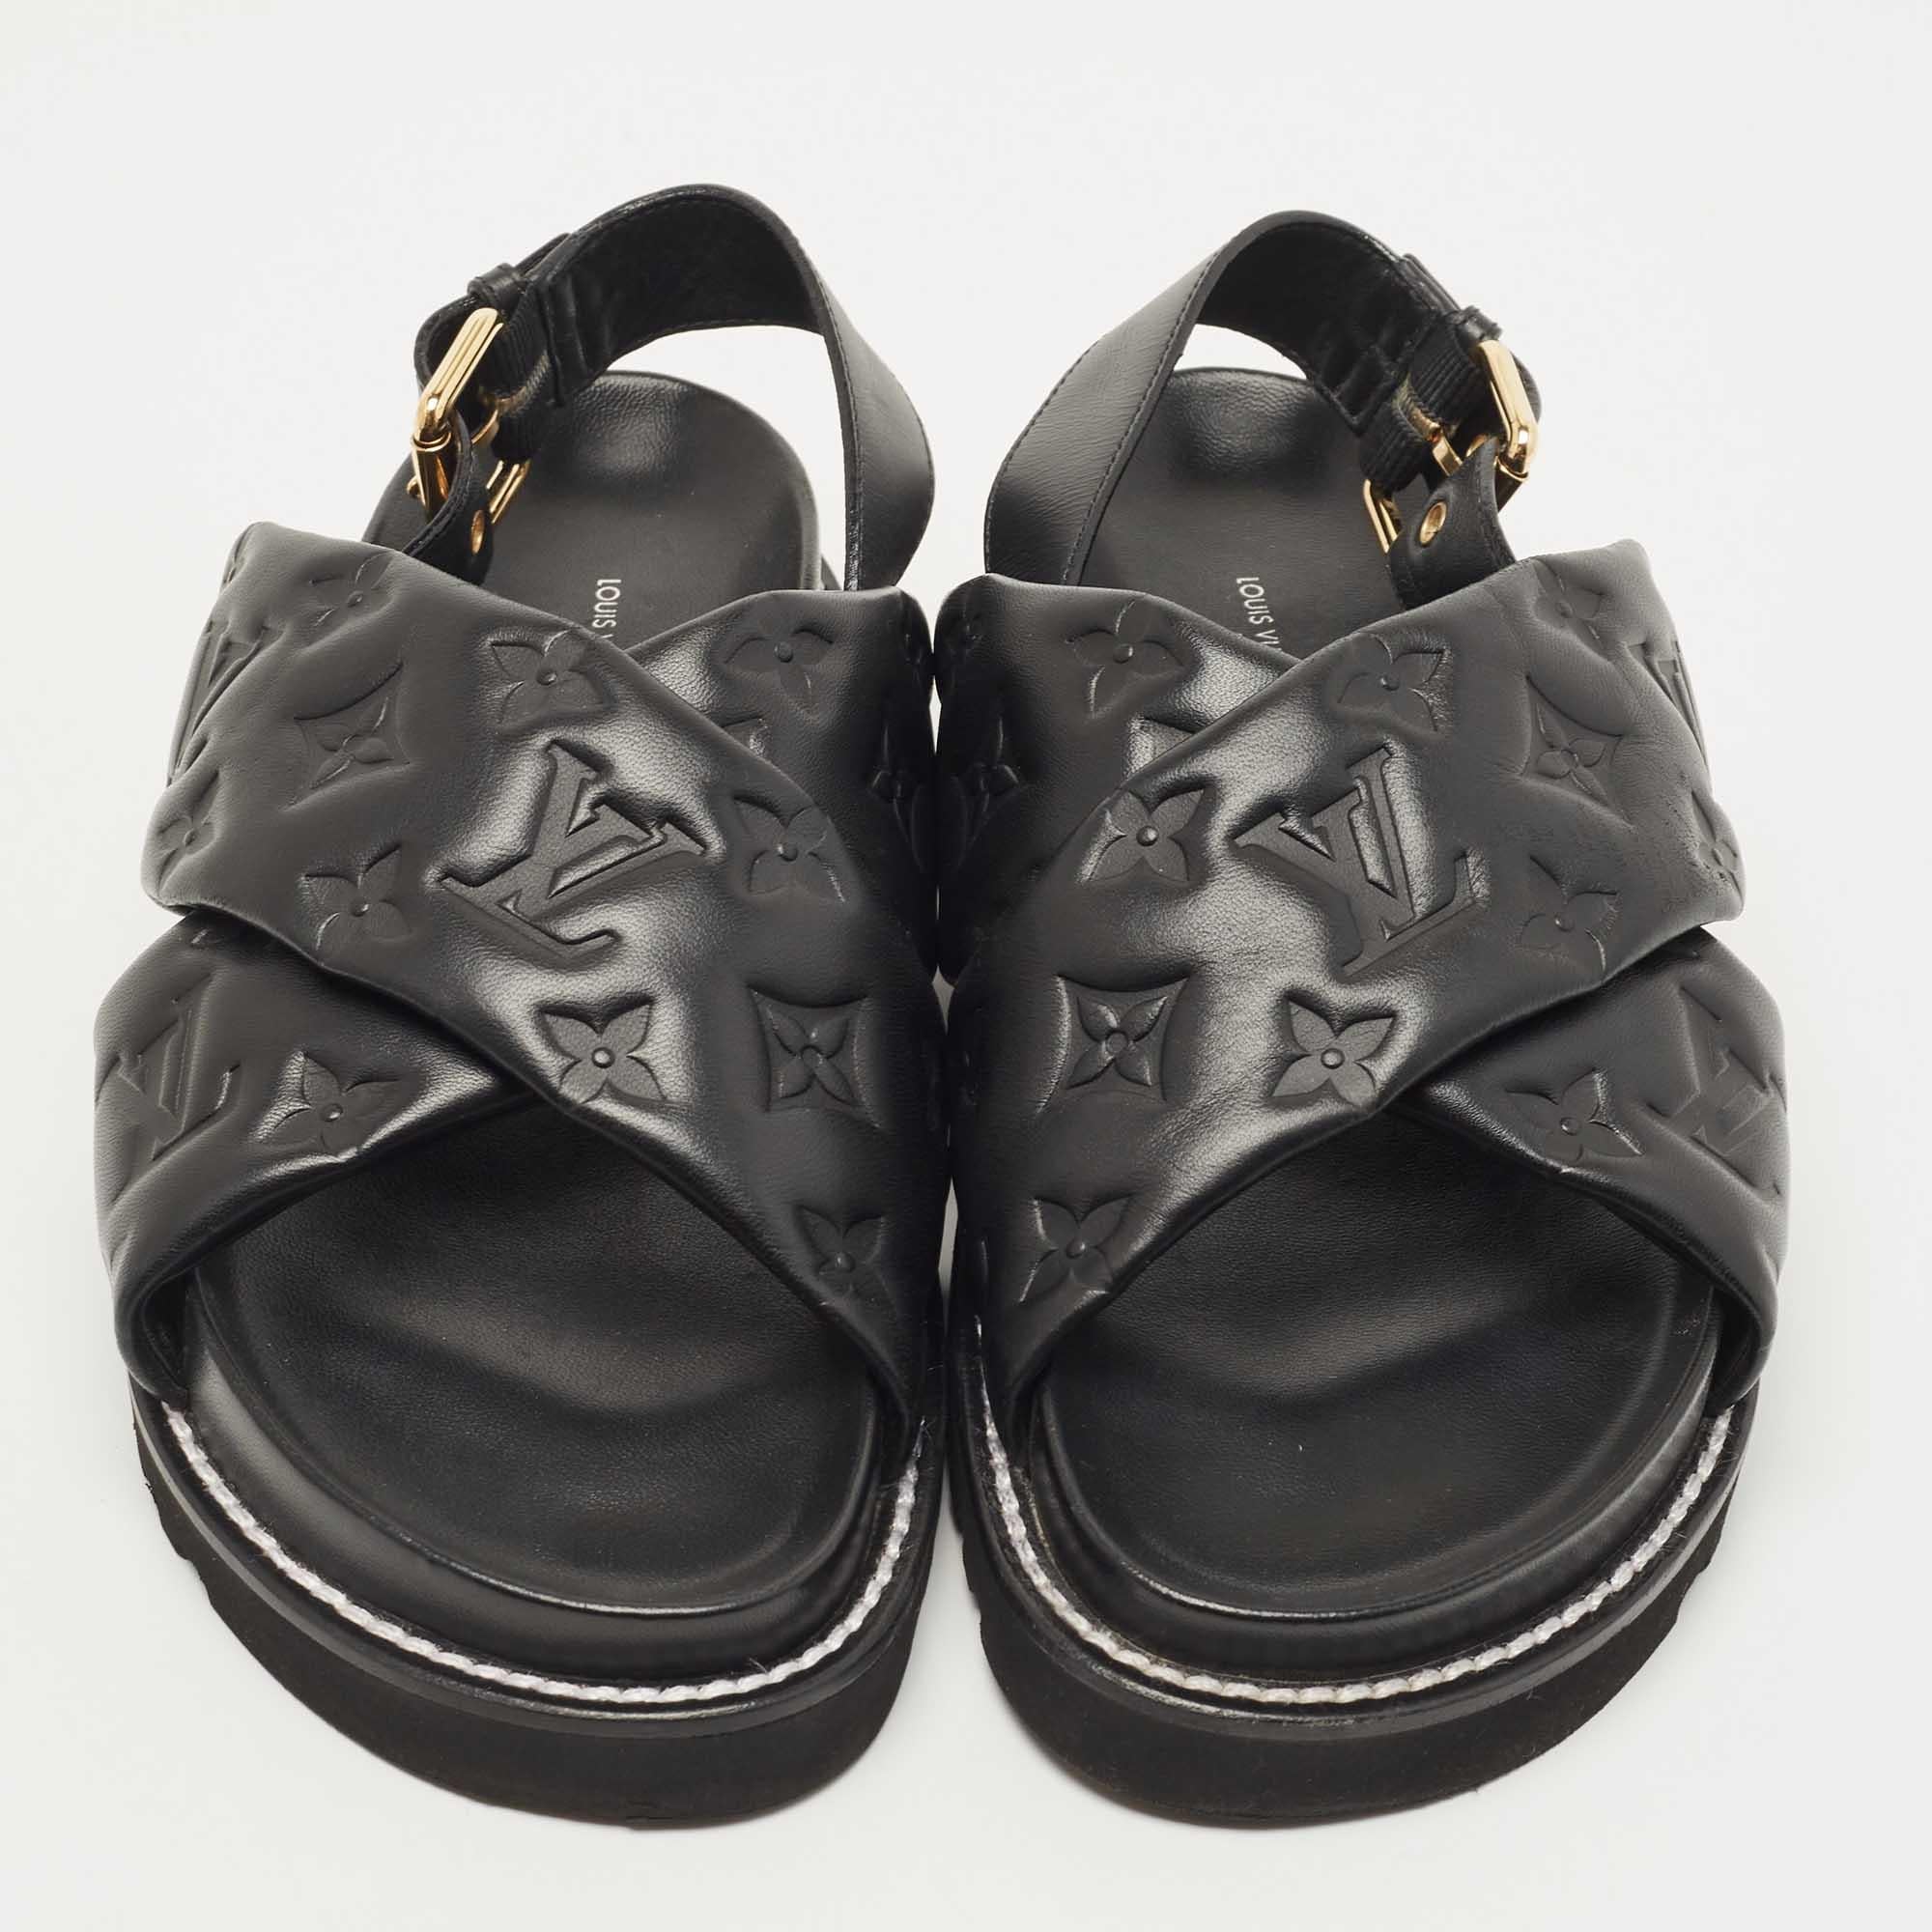 The Louis Vuitton Paseo flats are exquisite footwear, featuring the iconic LV monogram pattern embossed onto black leather. These elegant sandals offer comfort and style with a flat sole and a sleek, minimalist design, making them a luxurious